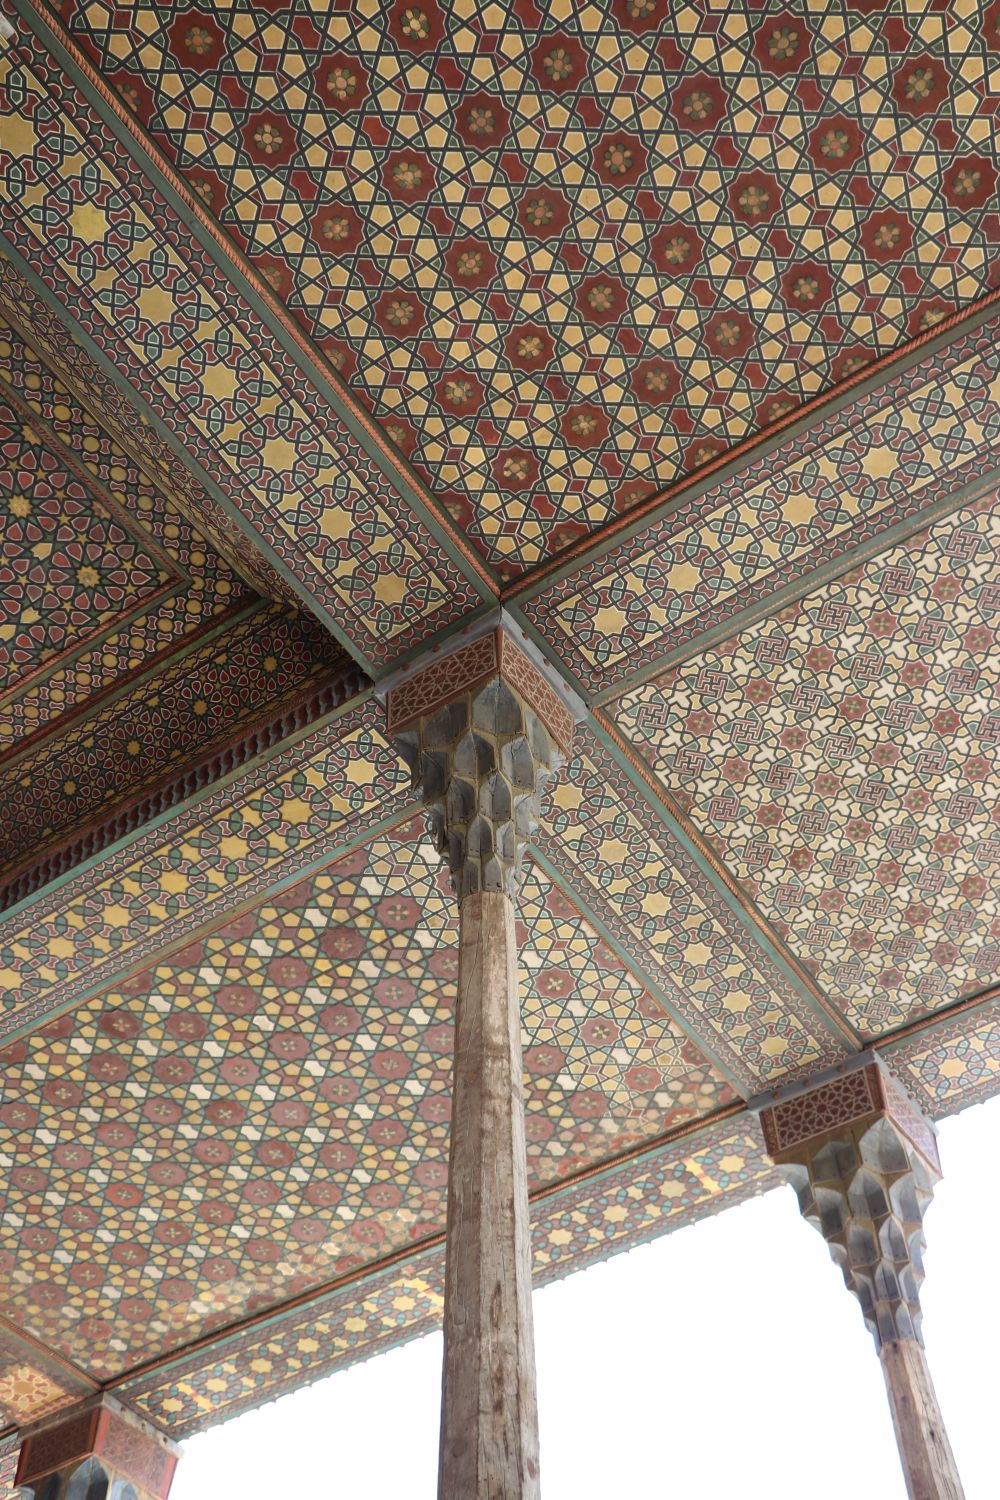 Ceiling of porch.